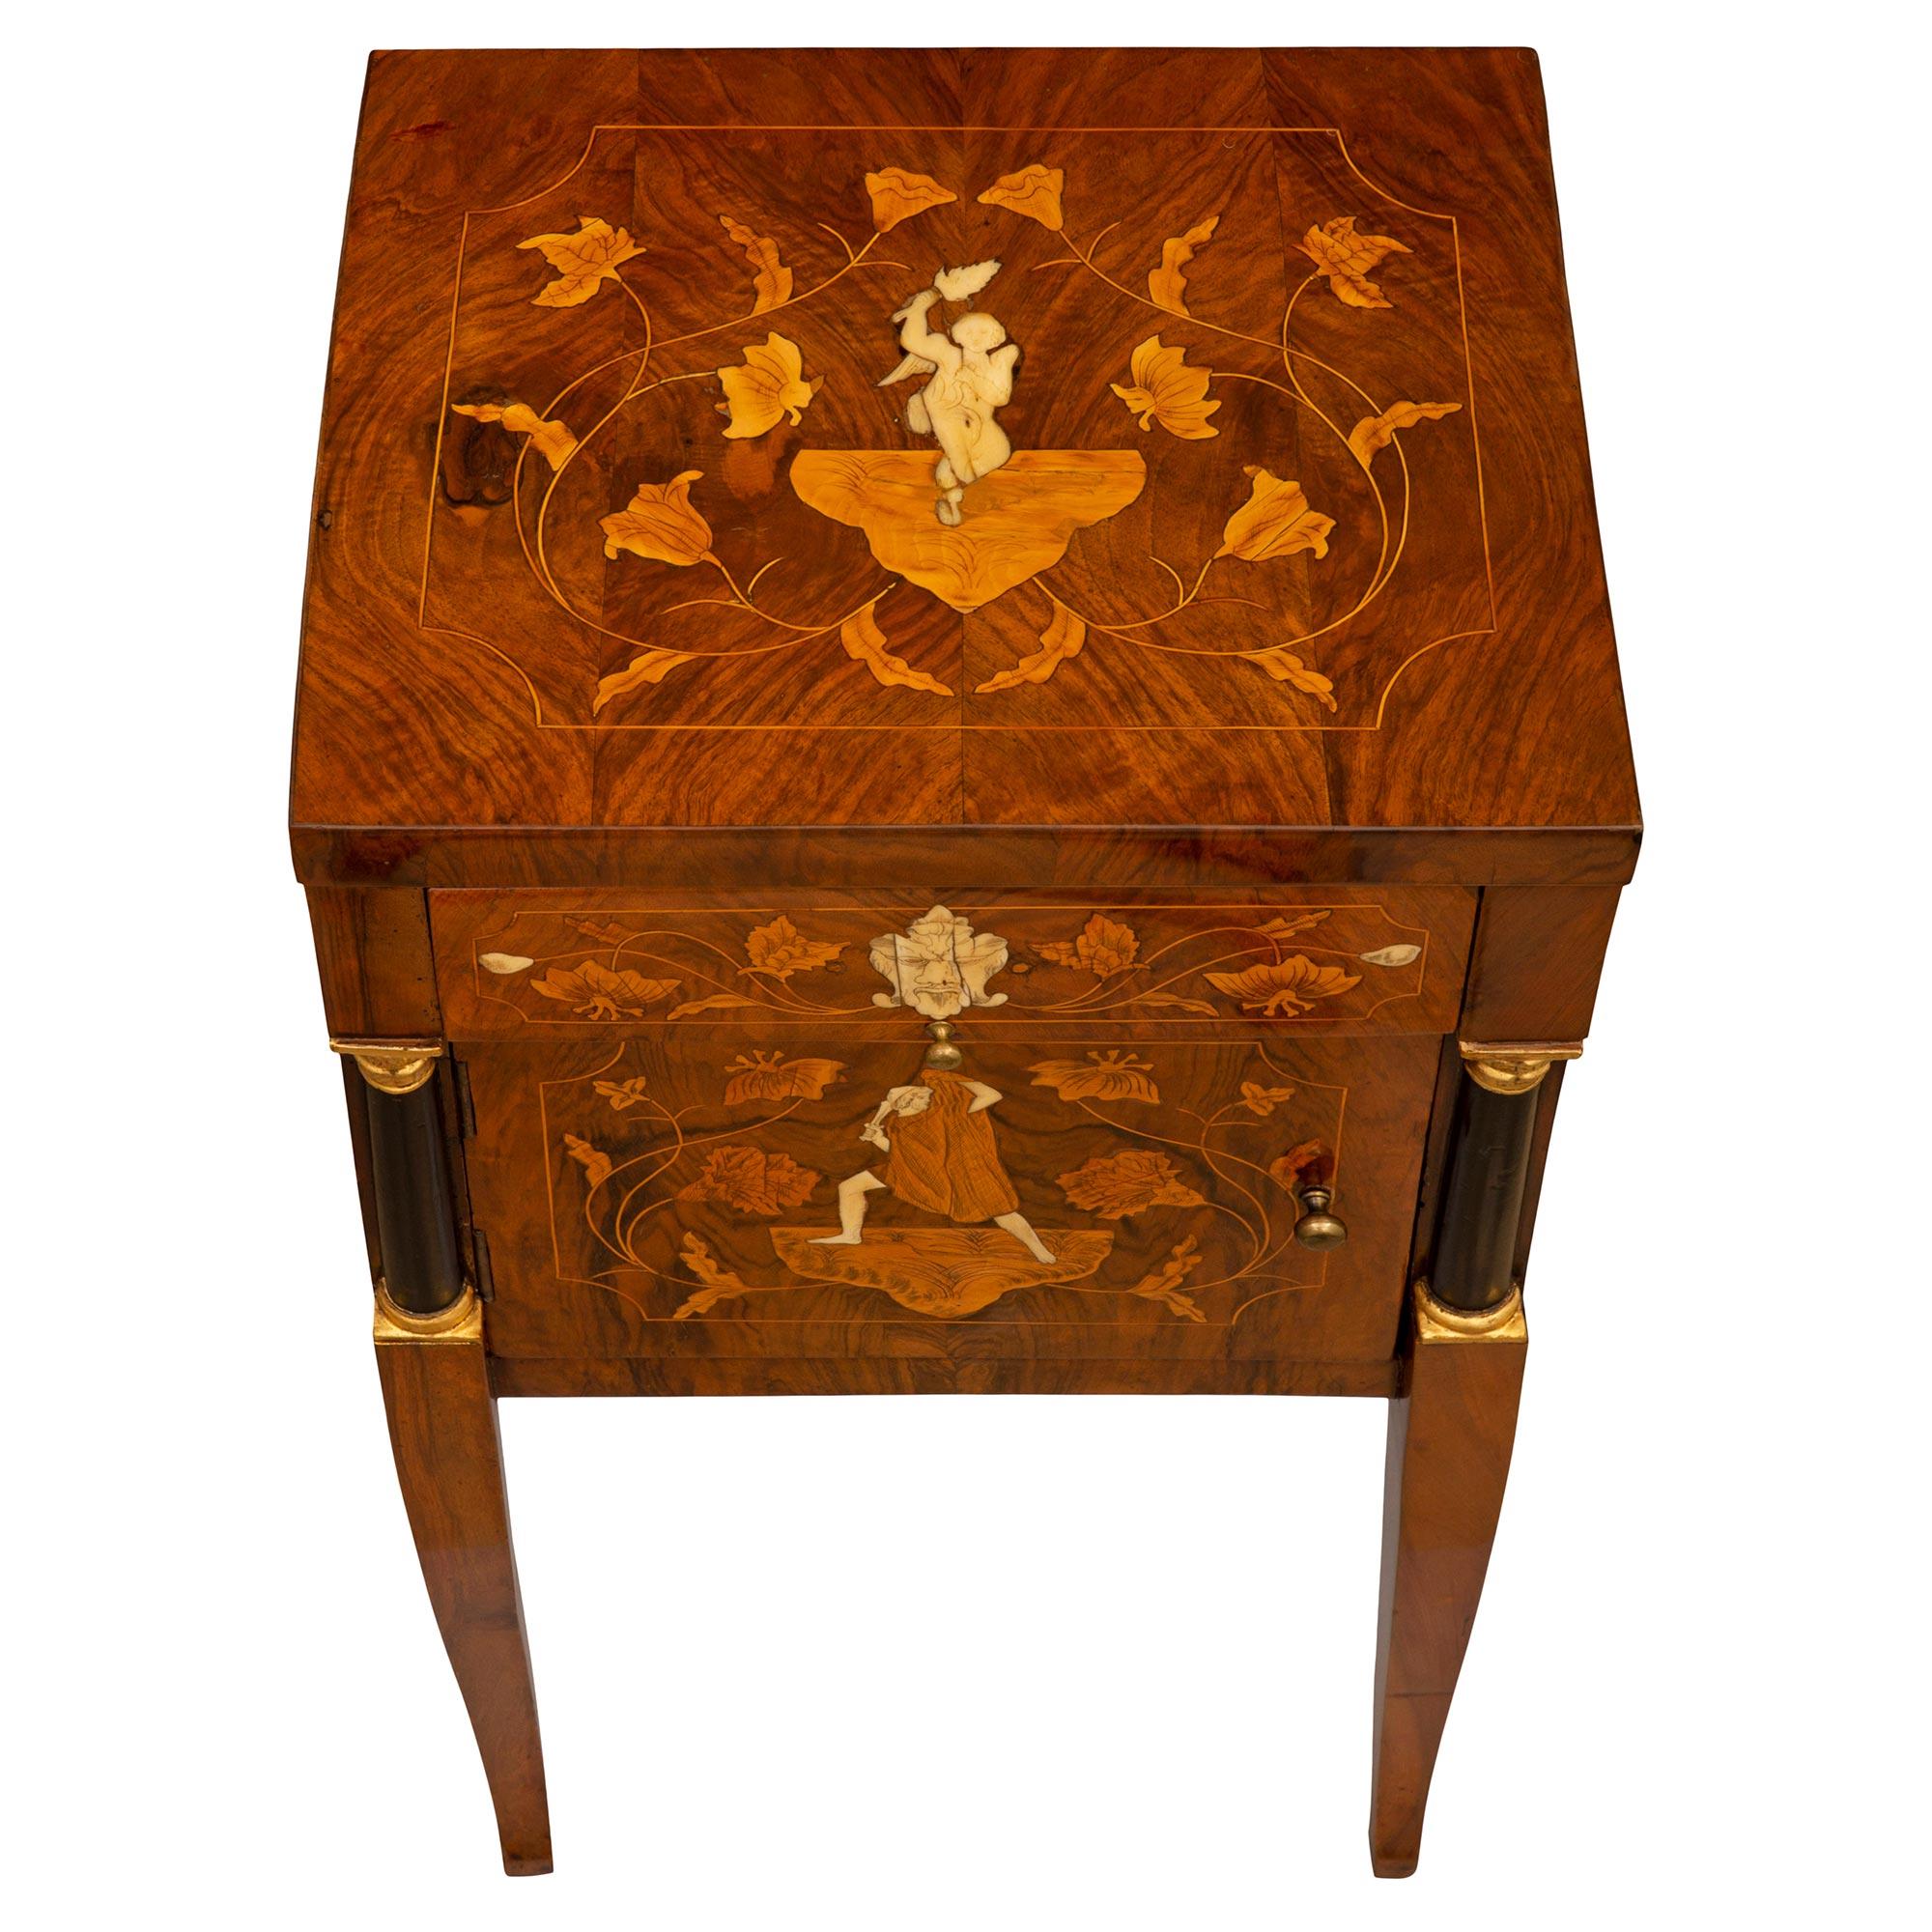 A striking and most decorative Italian 18th century Baroque period Walnut, Ebonized Fruitwood, giltwood, and bone side table. The one door, one drawer side table is raised by elegant lightly curved square tapered legs leading up to impressive